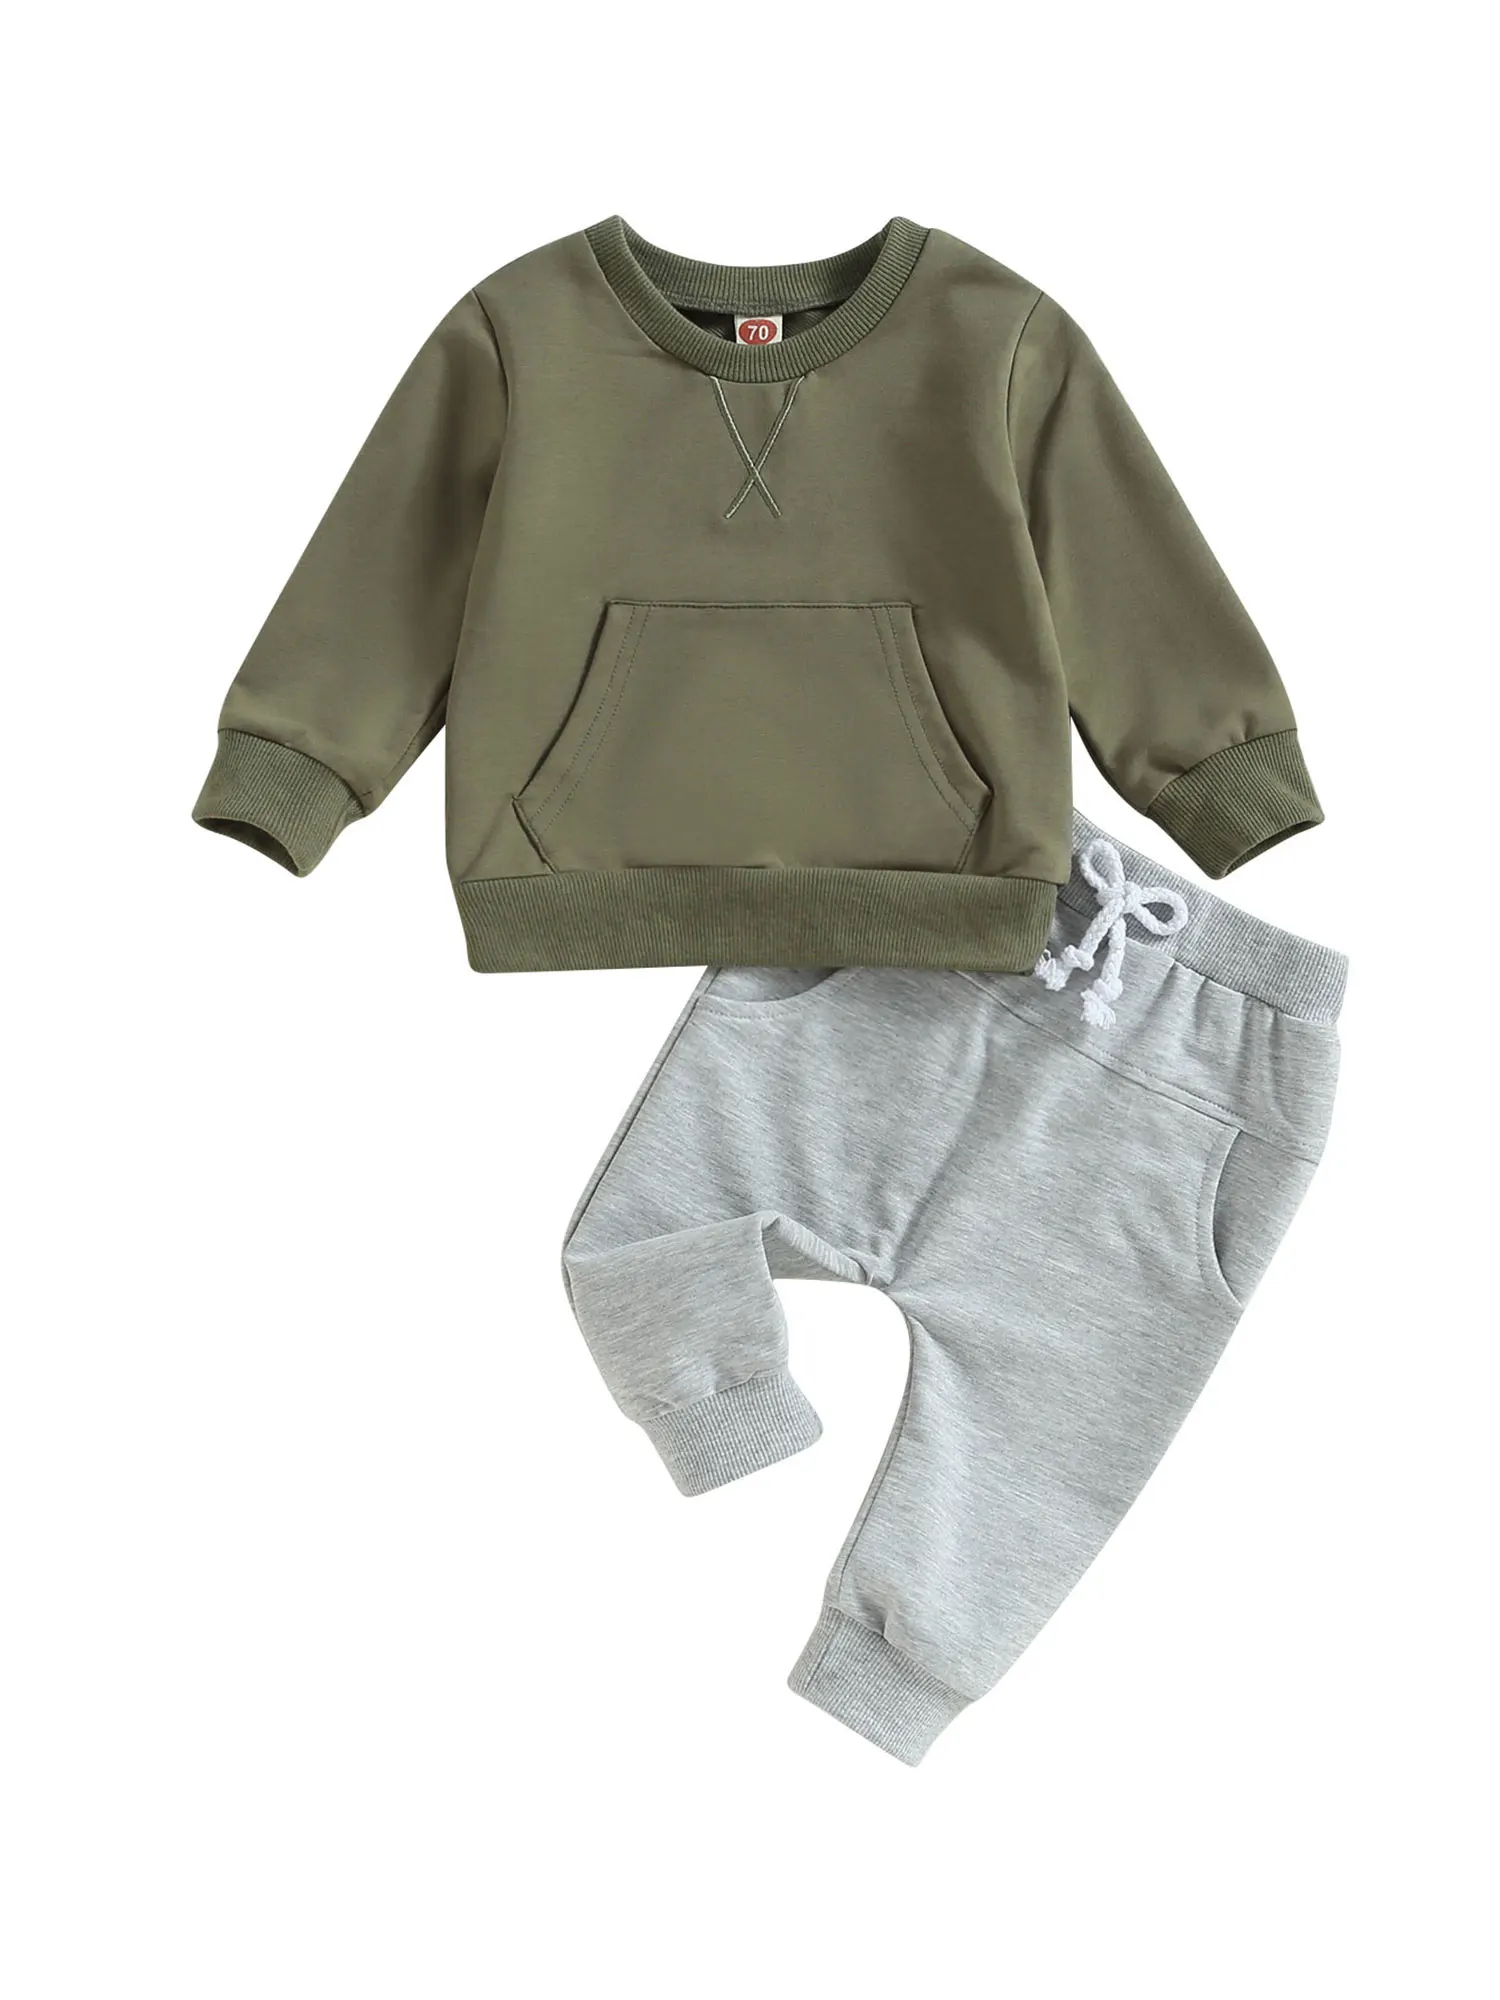 

Cute Infant Unisex Autumn Winter Clothes Cozy Pocketed Sweater Pants Set for Baby Boy Girl